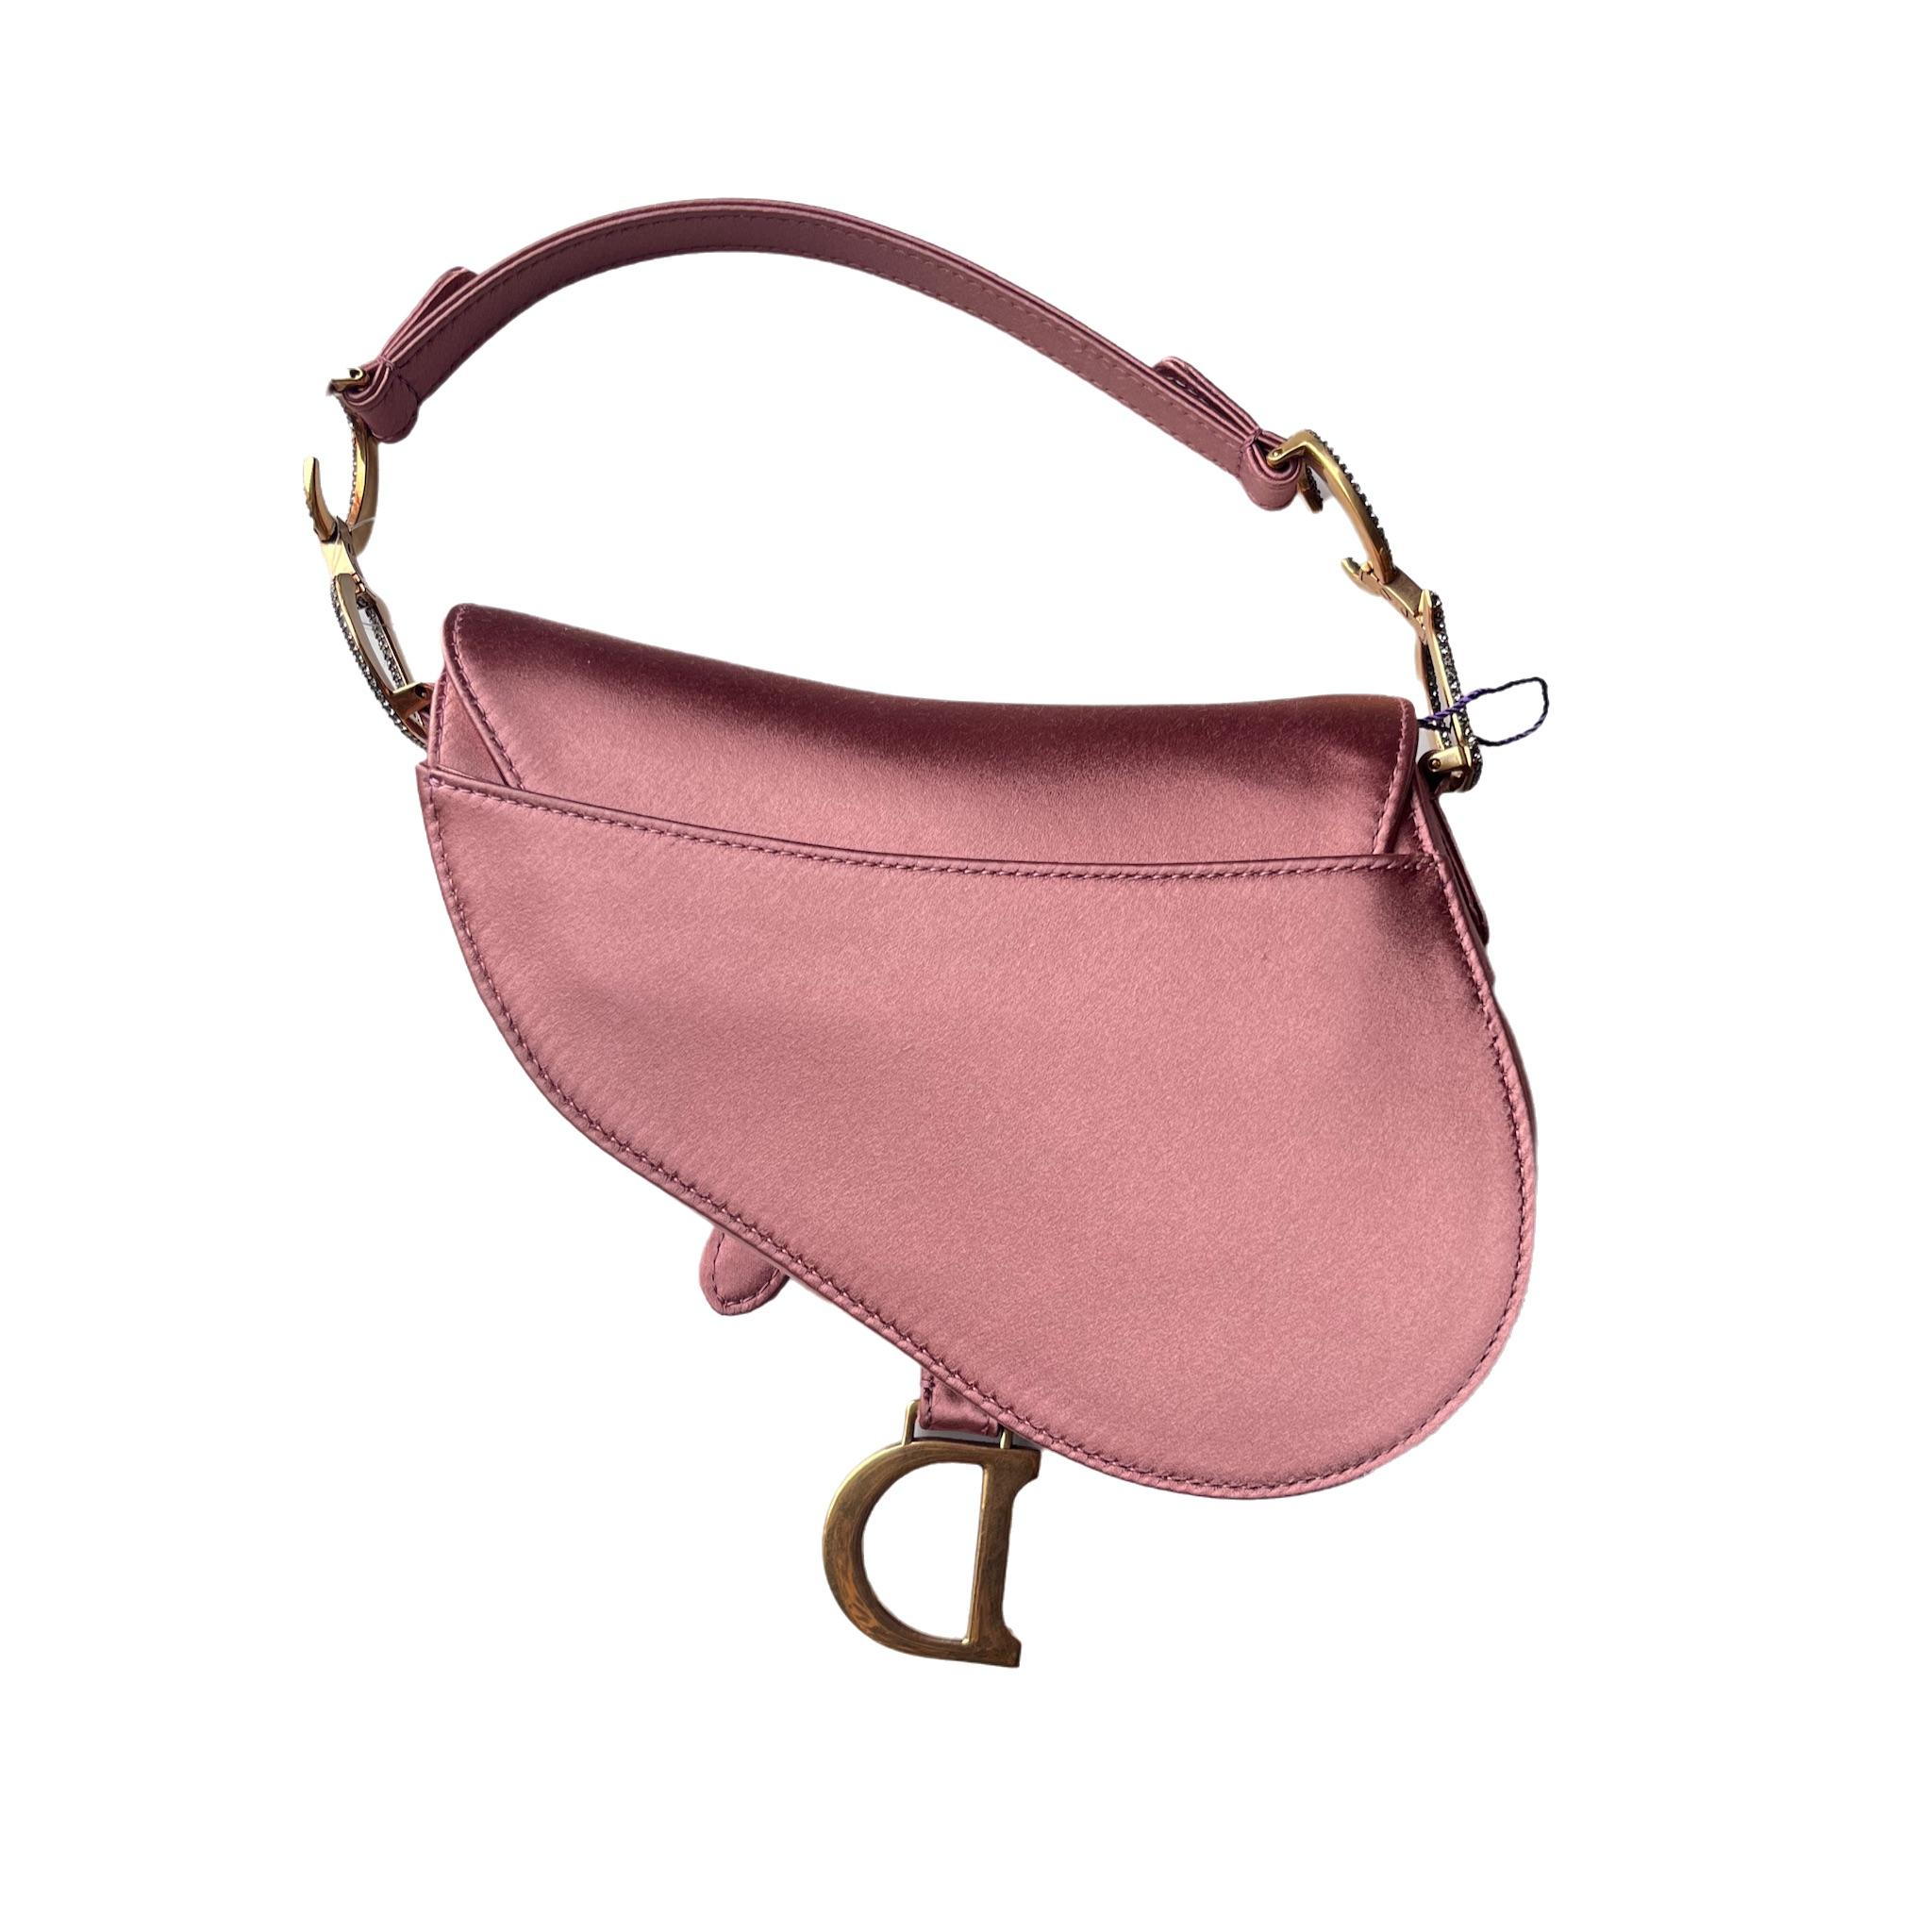 Dior Saddle bag, crafted in rose pink silk satin, the legendary design comes in size mini, features a magnetic flap, and bedazzling crystal embellished CD signature on both sides of the strap. The Saddle bag may be carried by hand. 

The silk saddle